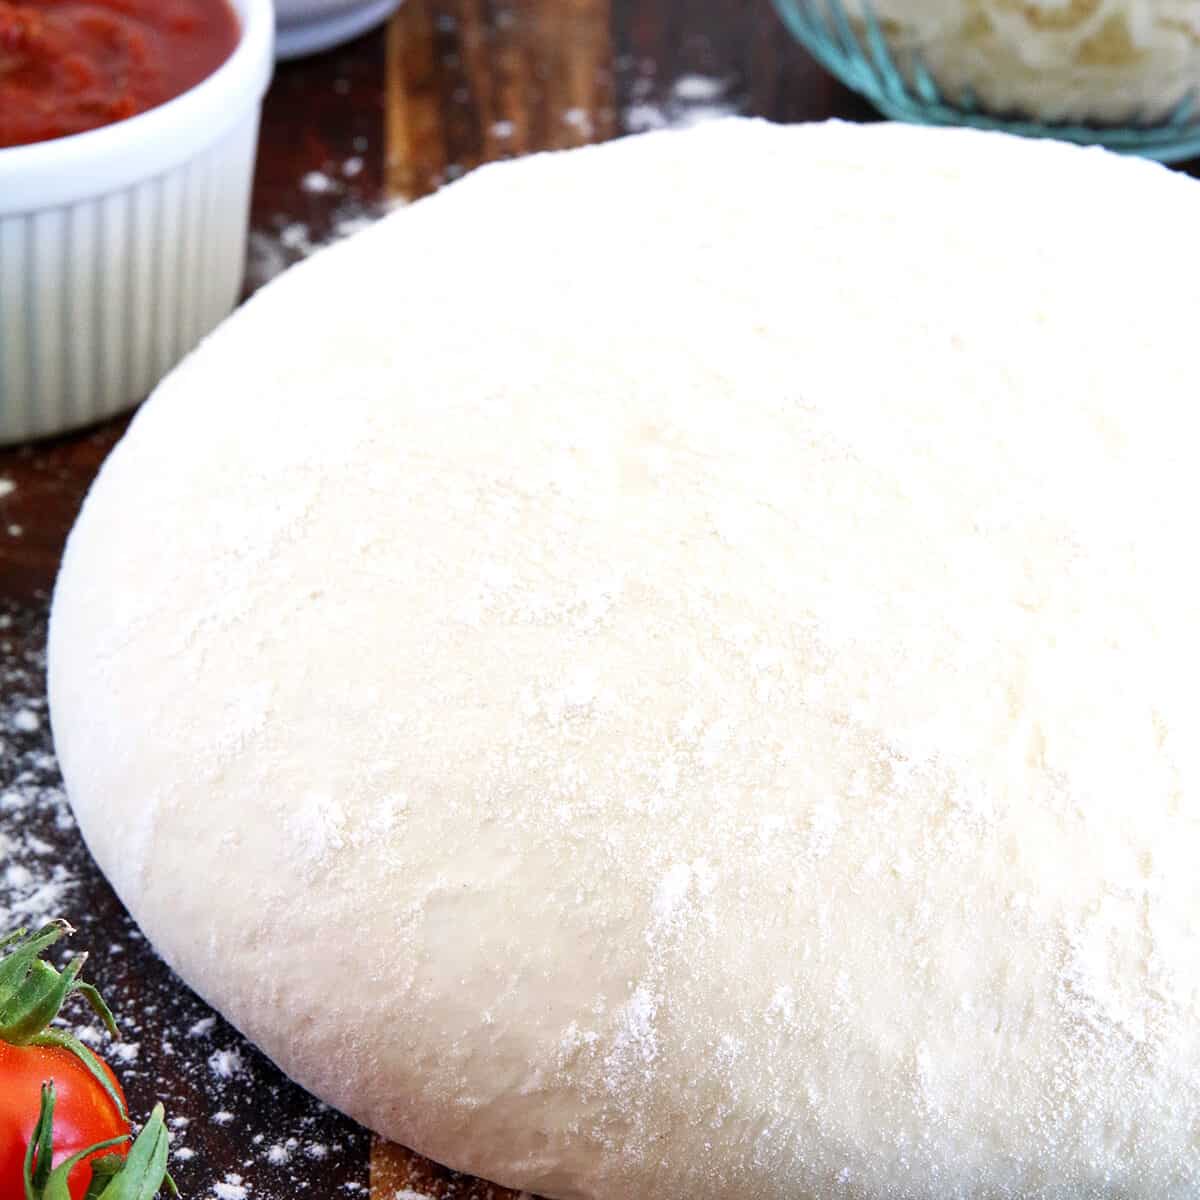 I've been making Homemade Pizza Dough for many years. I personally prefer homemade dough for homemade pizzas over restaurant bought. First, preparing it from scratch at home is the essence of the taste of home. Second, because I know that it has been prepared cleanly with the freshest ingredients for an unbeatable, delicious taste.